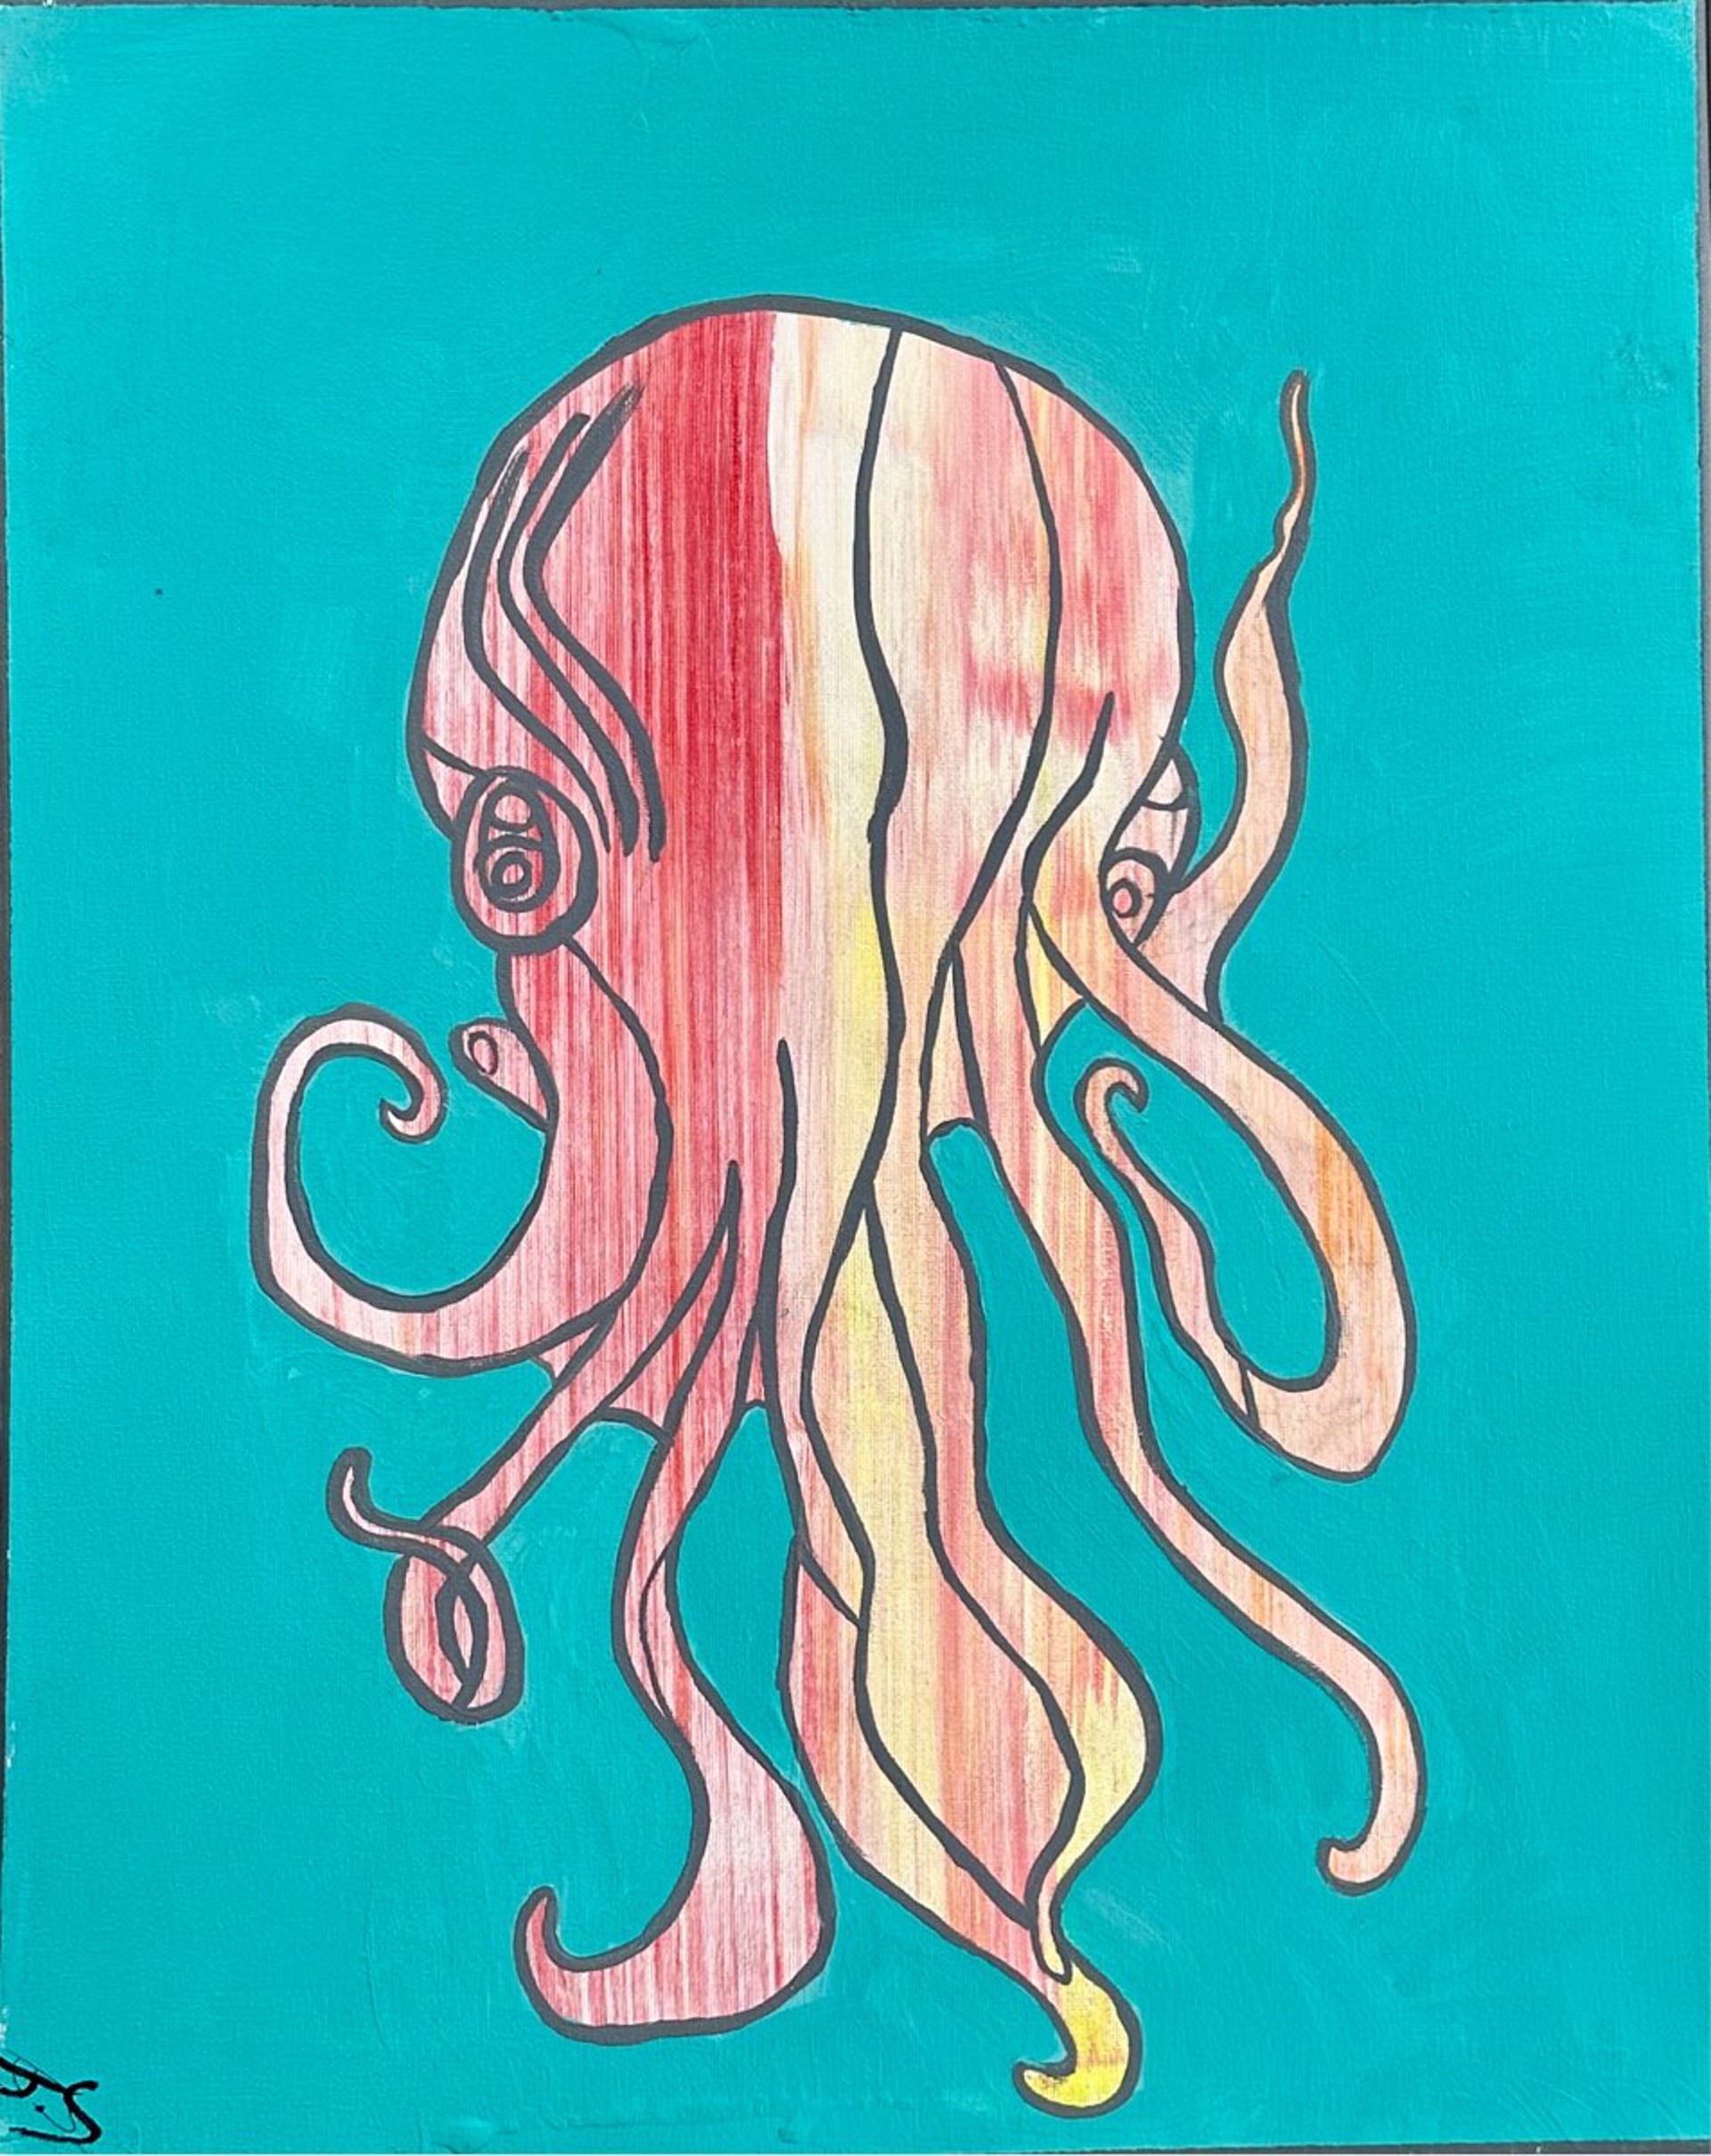 "Octopus" by Justin S. by One Step Beyond